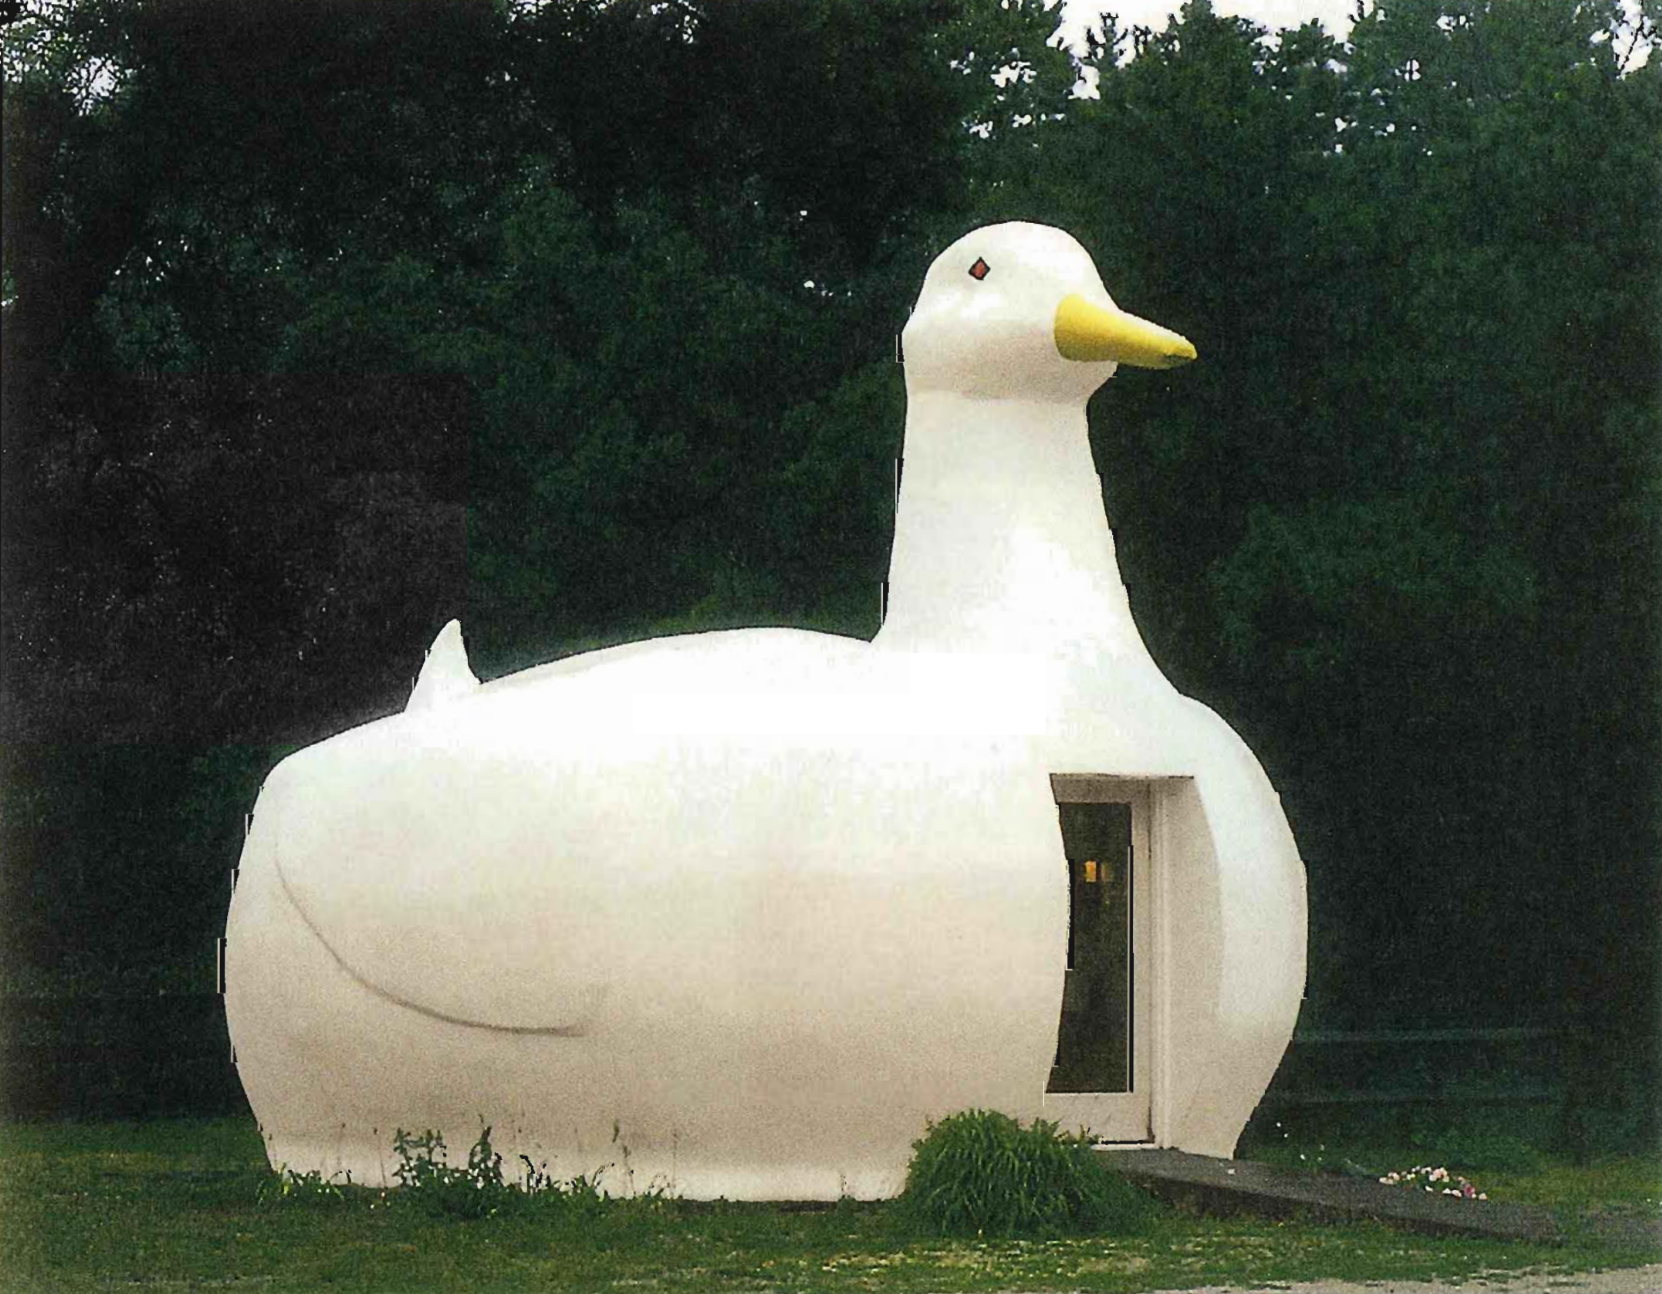 The big duck building!